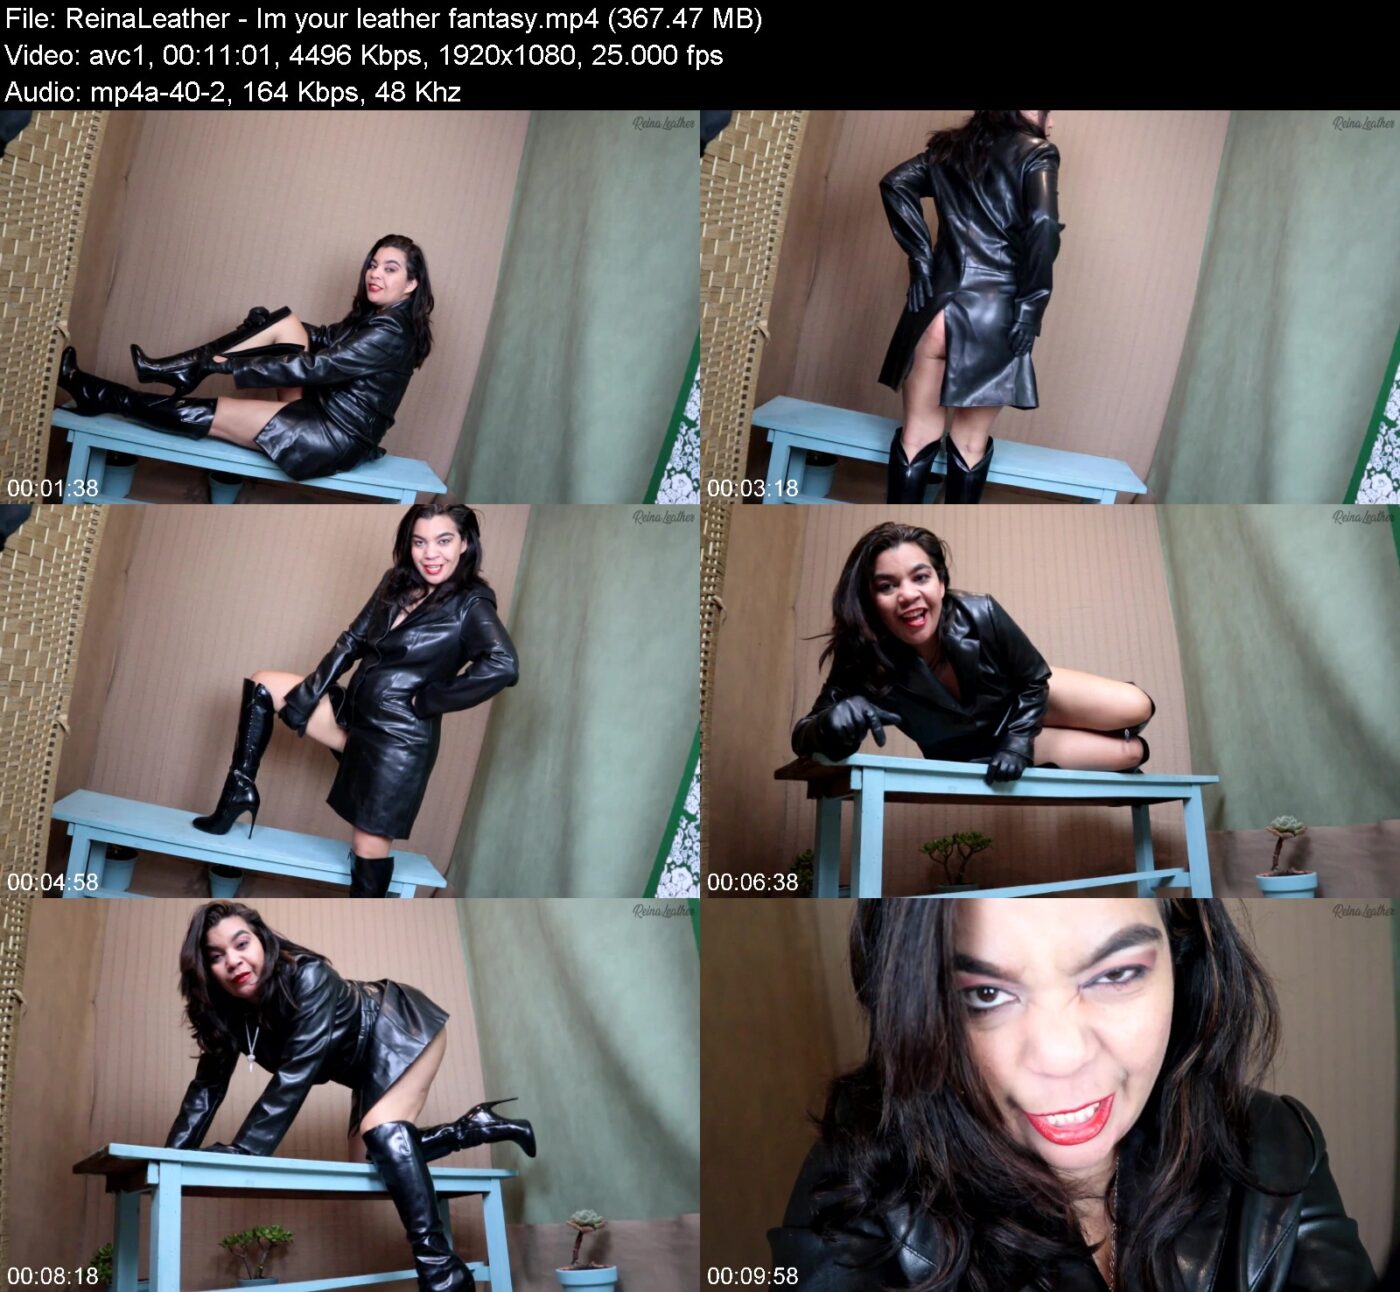 Actress: ReinaLeather. Title and Studio: Im your leather fantasy